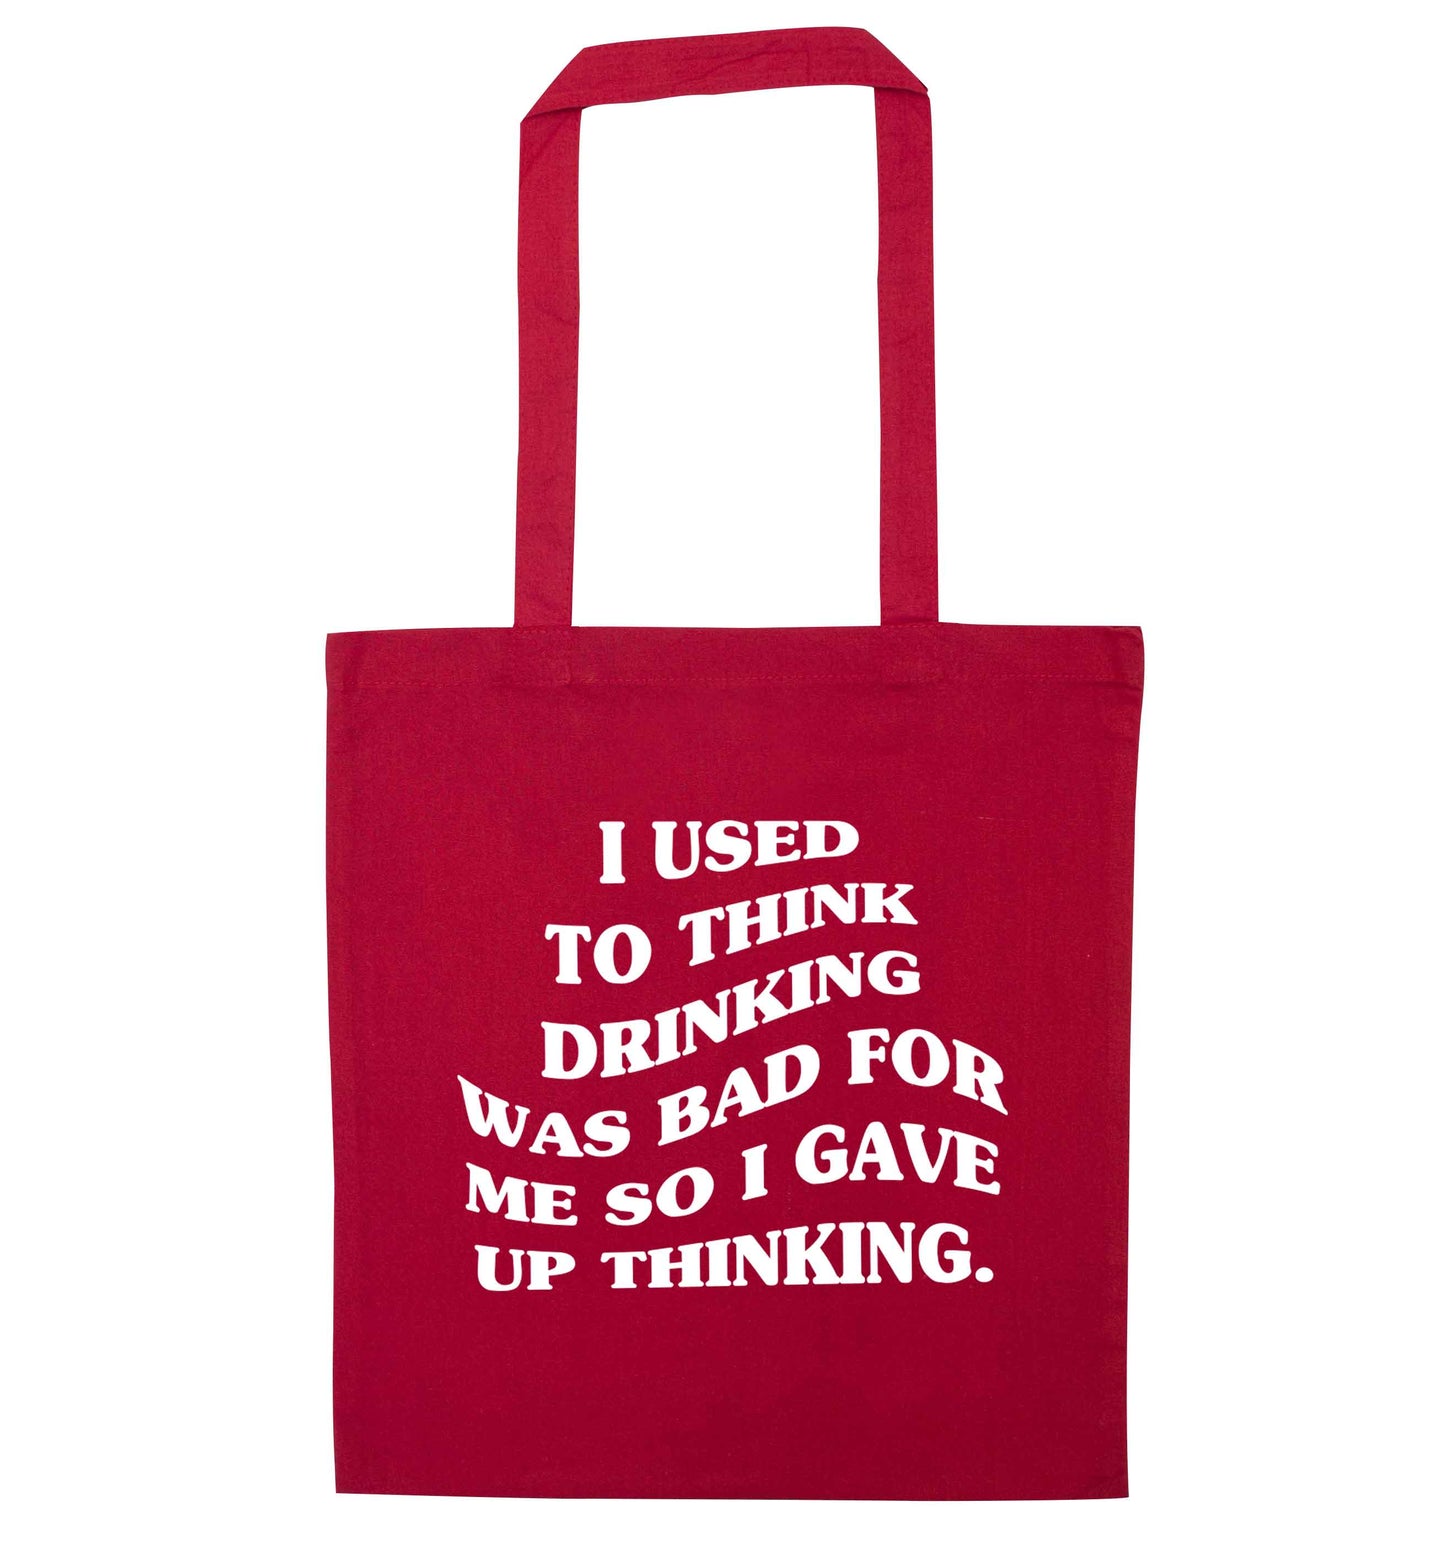 I used to think drinking was bad so I gave up thinking red tote bag